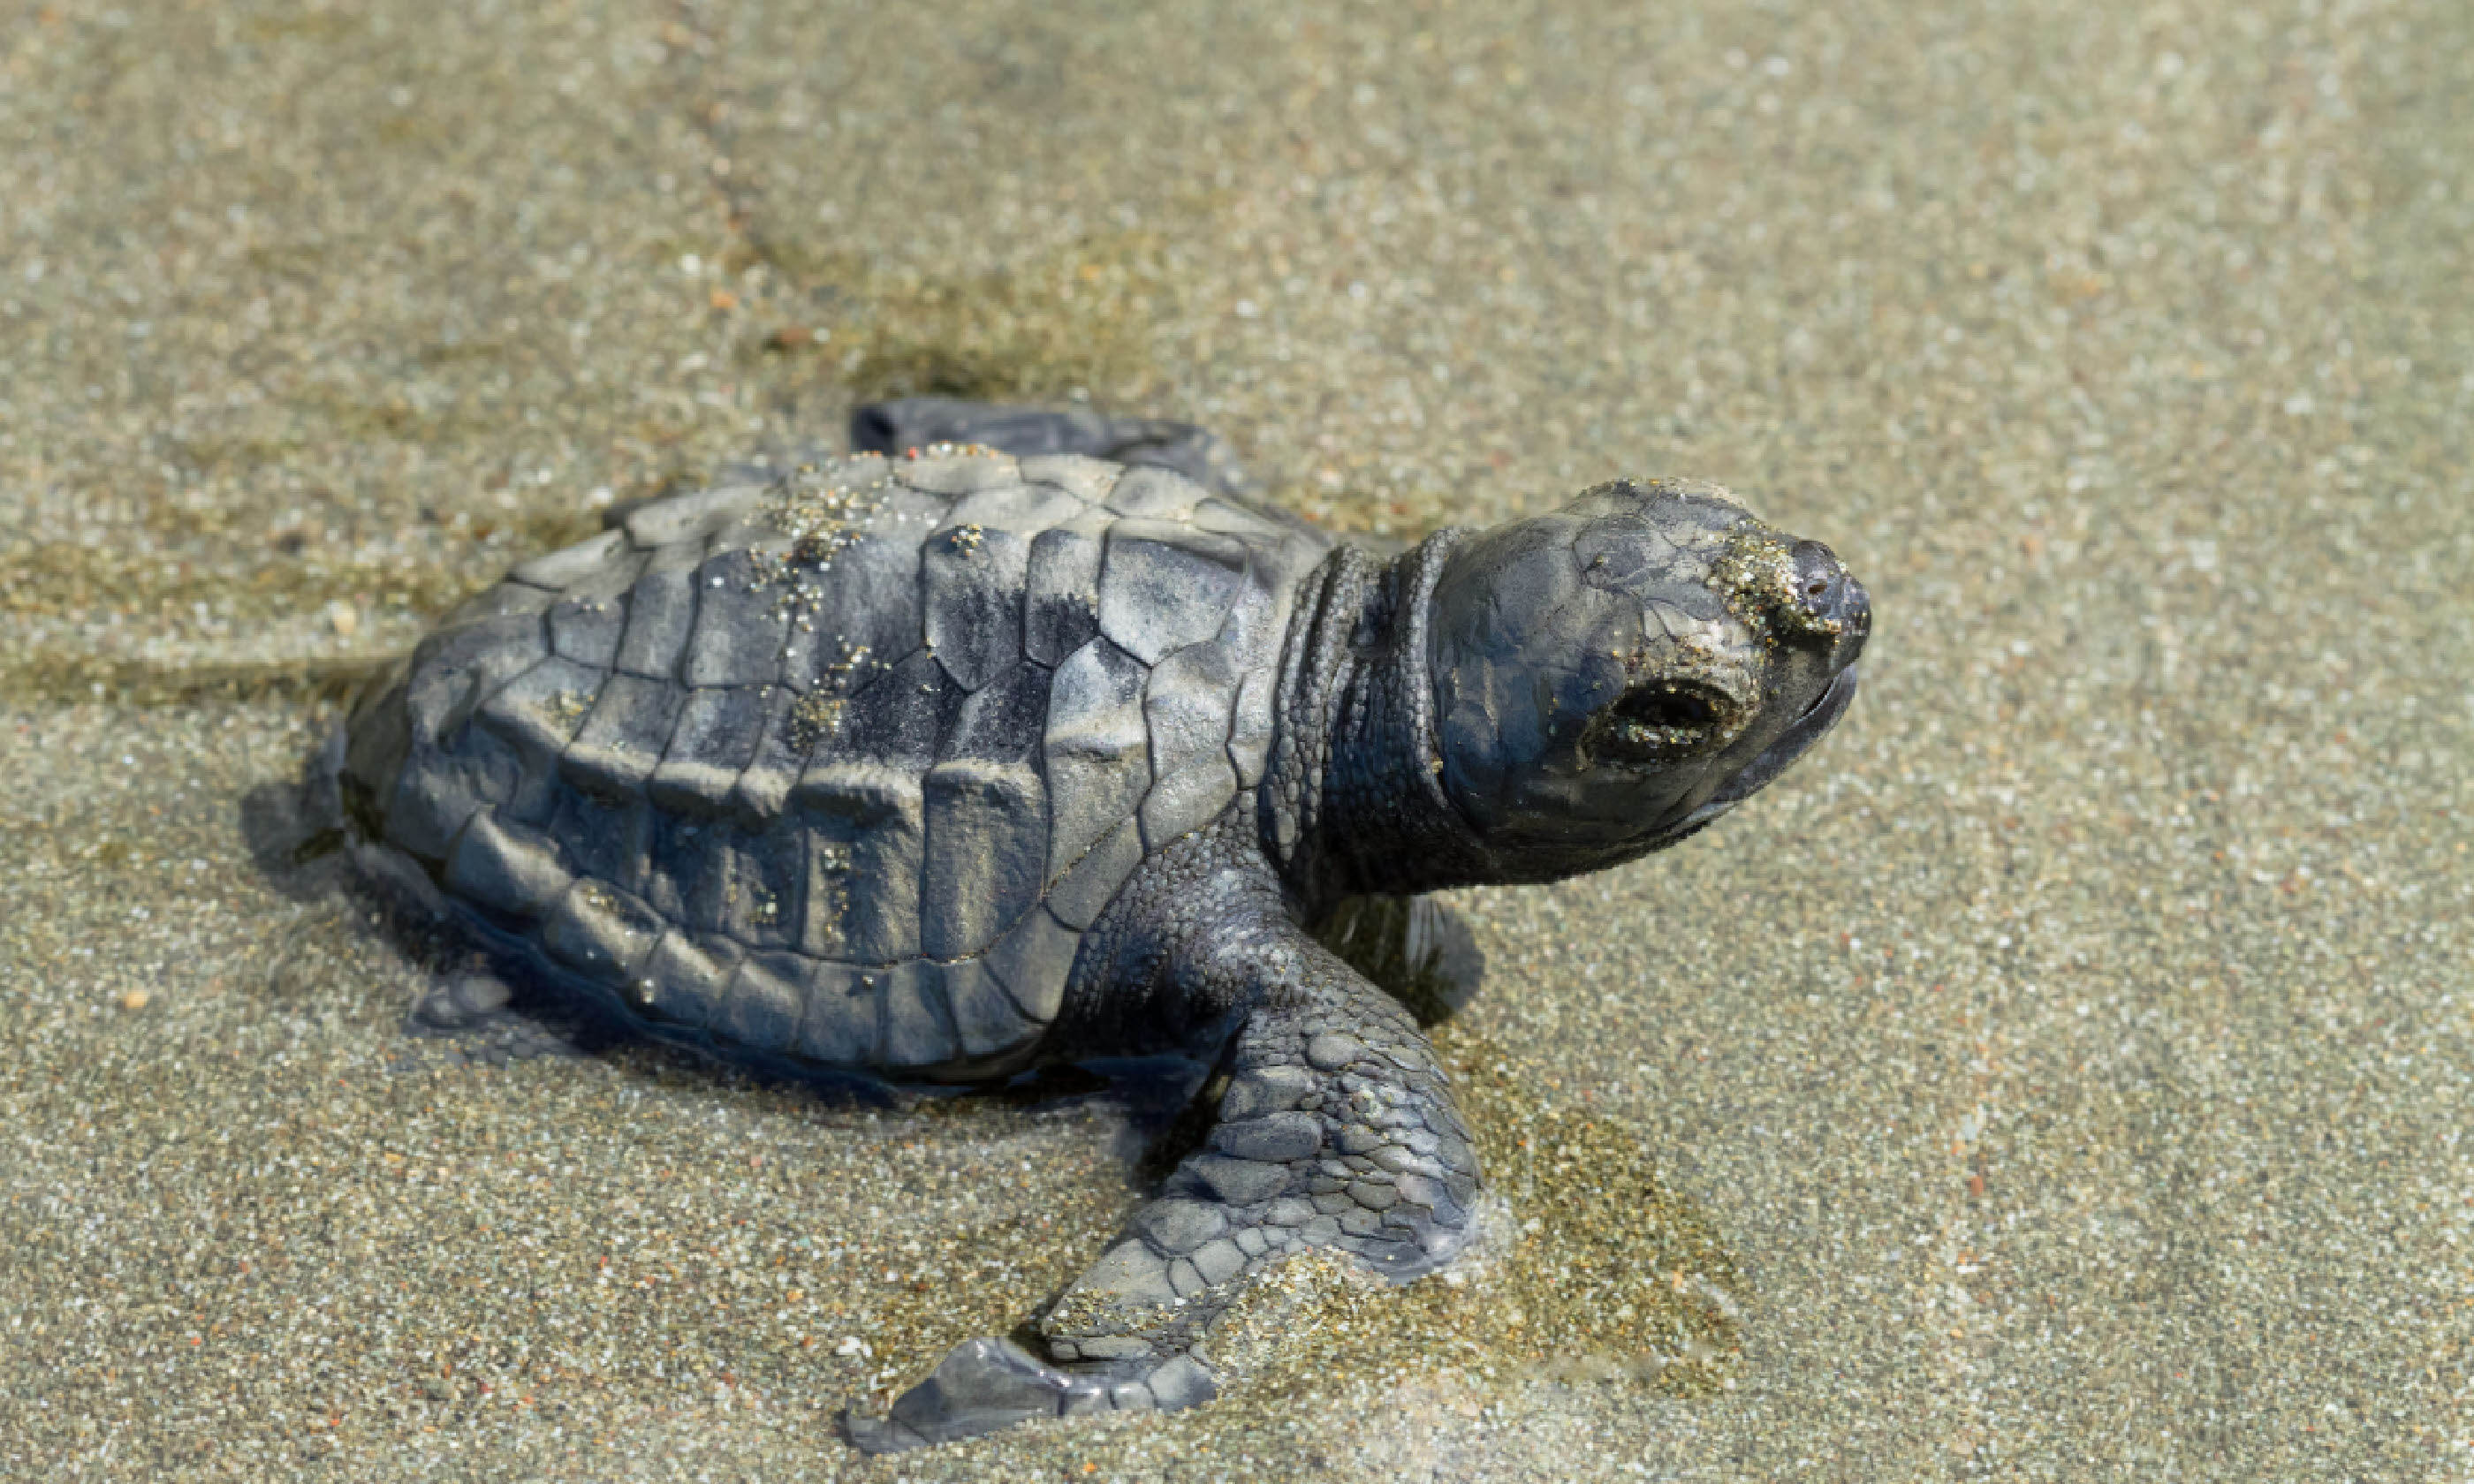 Olive ridley turtle (Shutterstock)